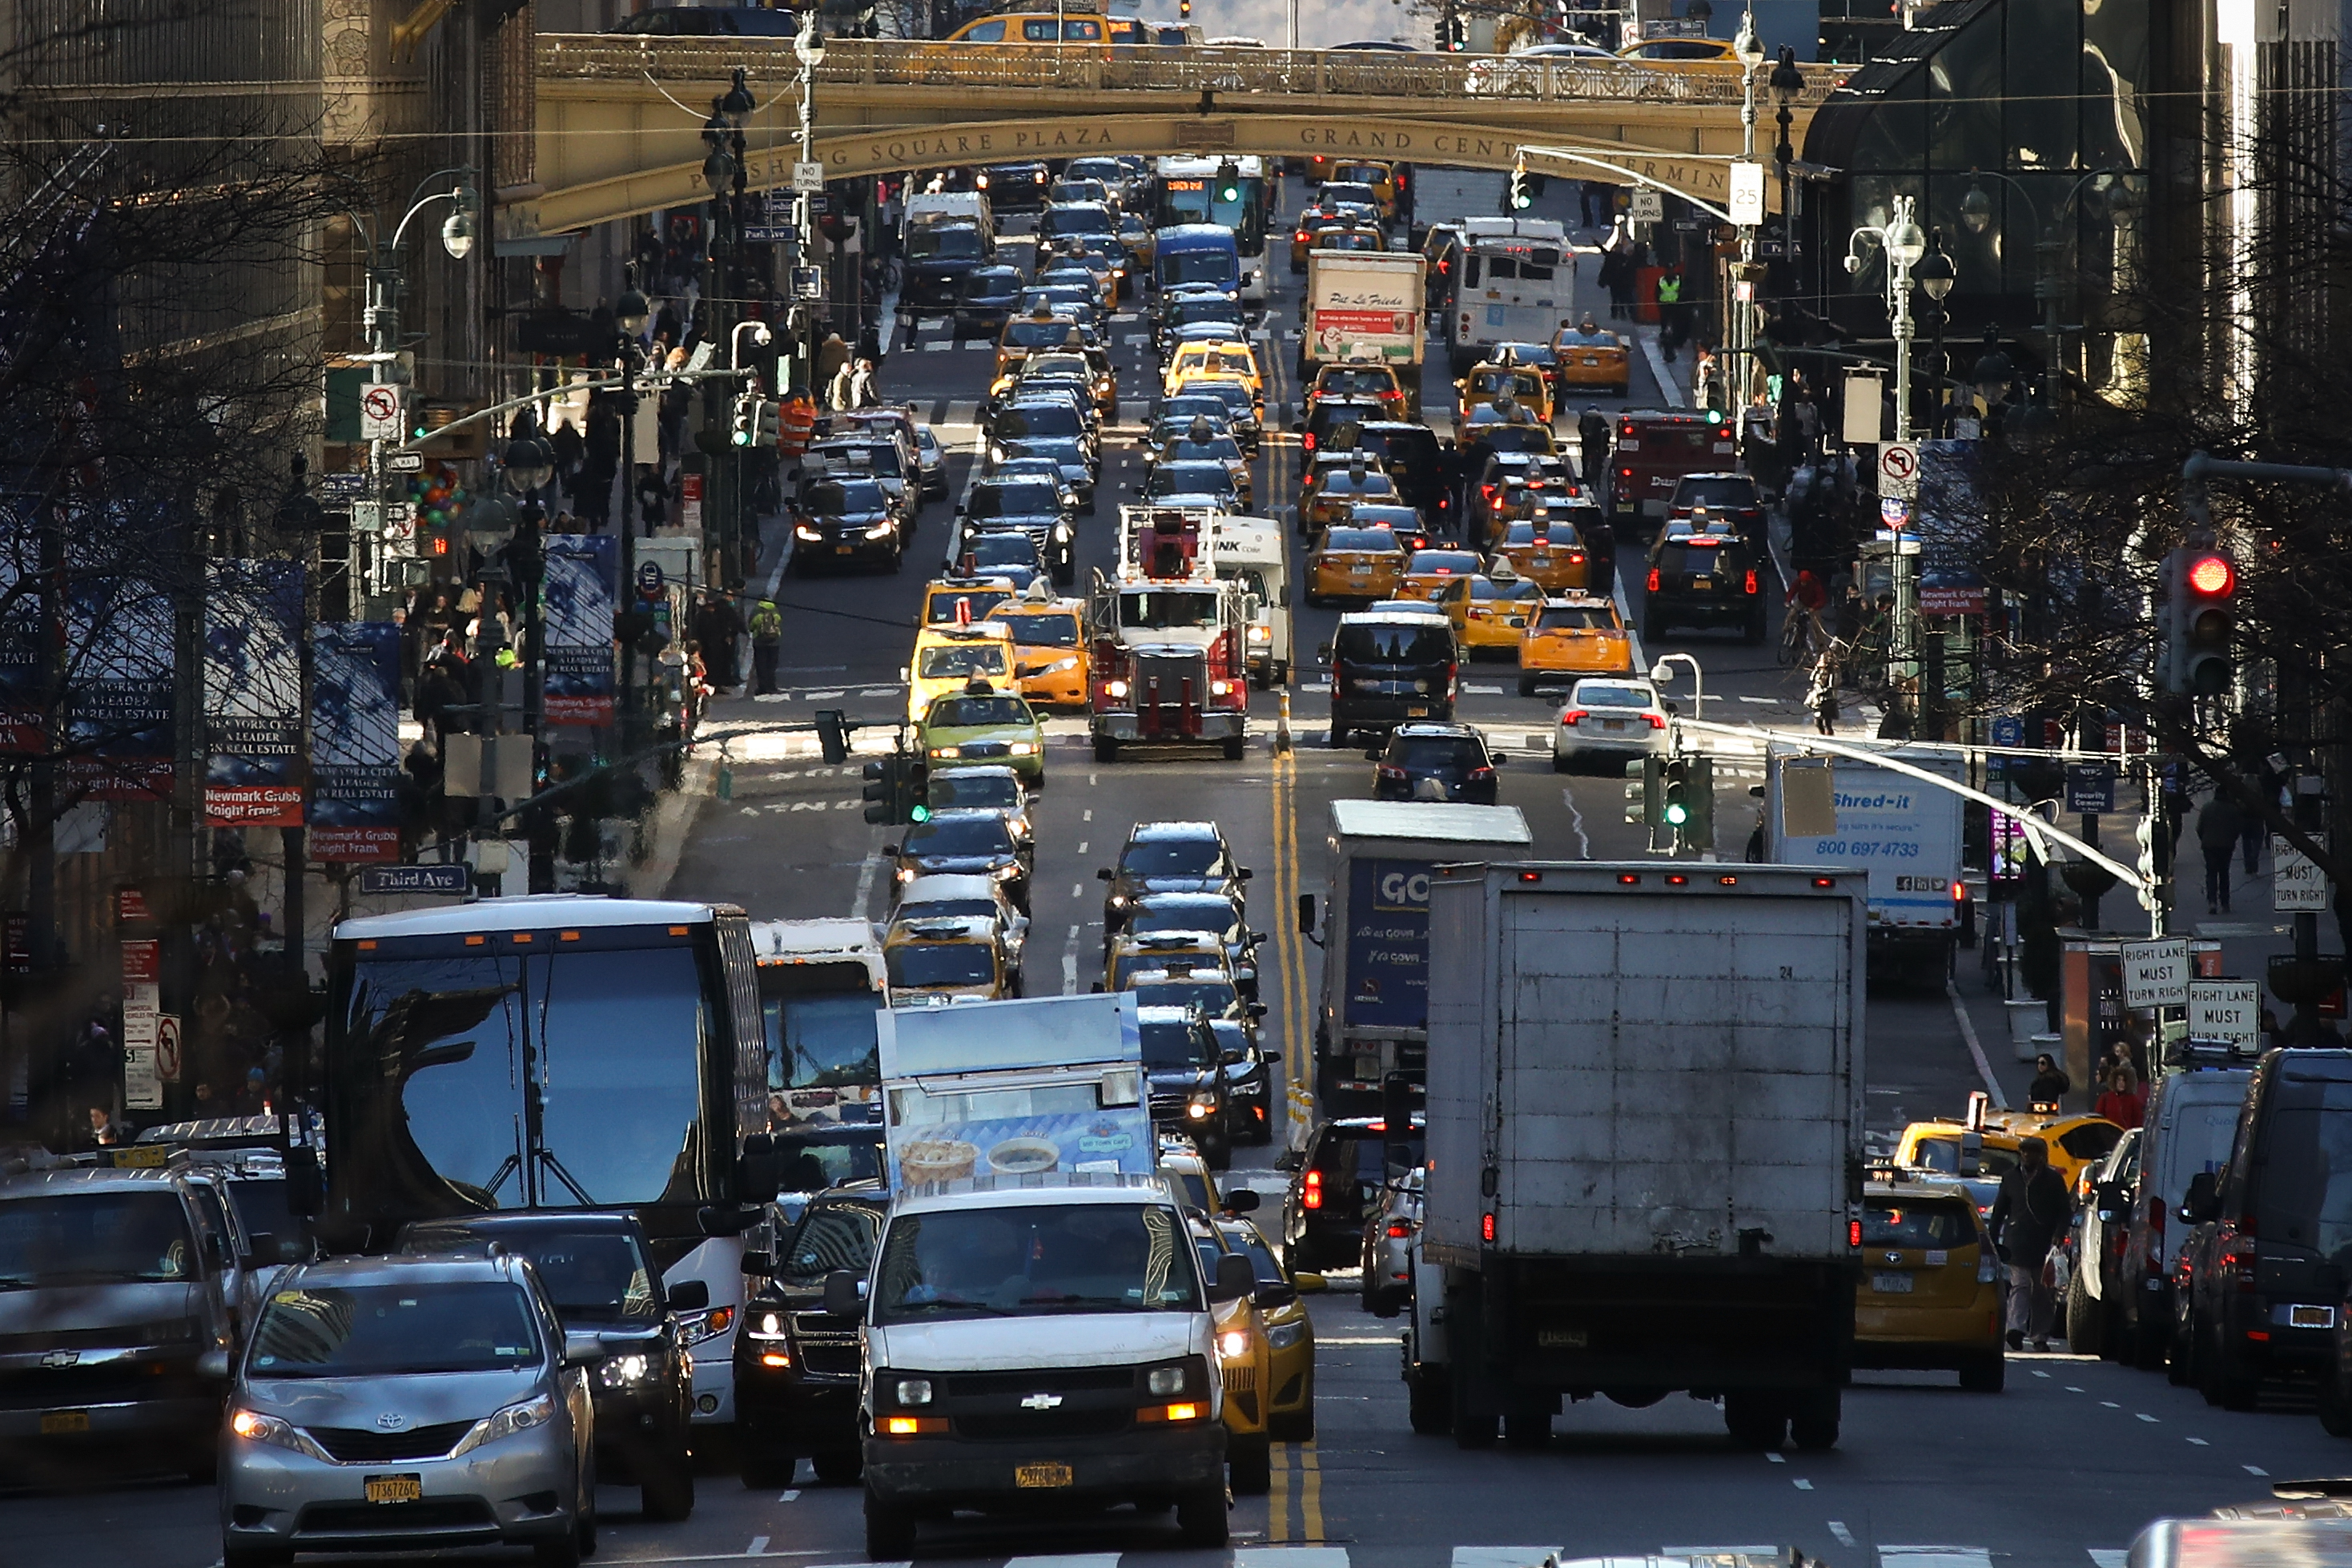 A congested road in Manhattan packed with cars, trucks, and buses bumper-to-bumper.